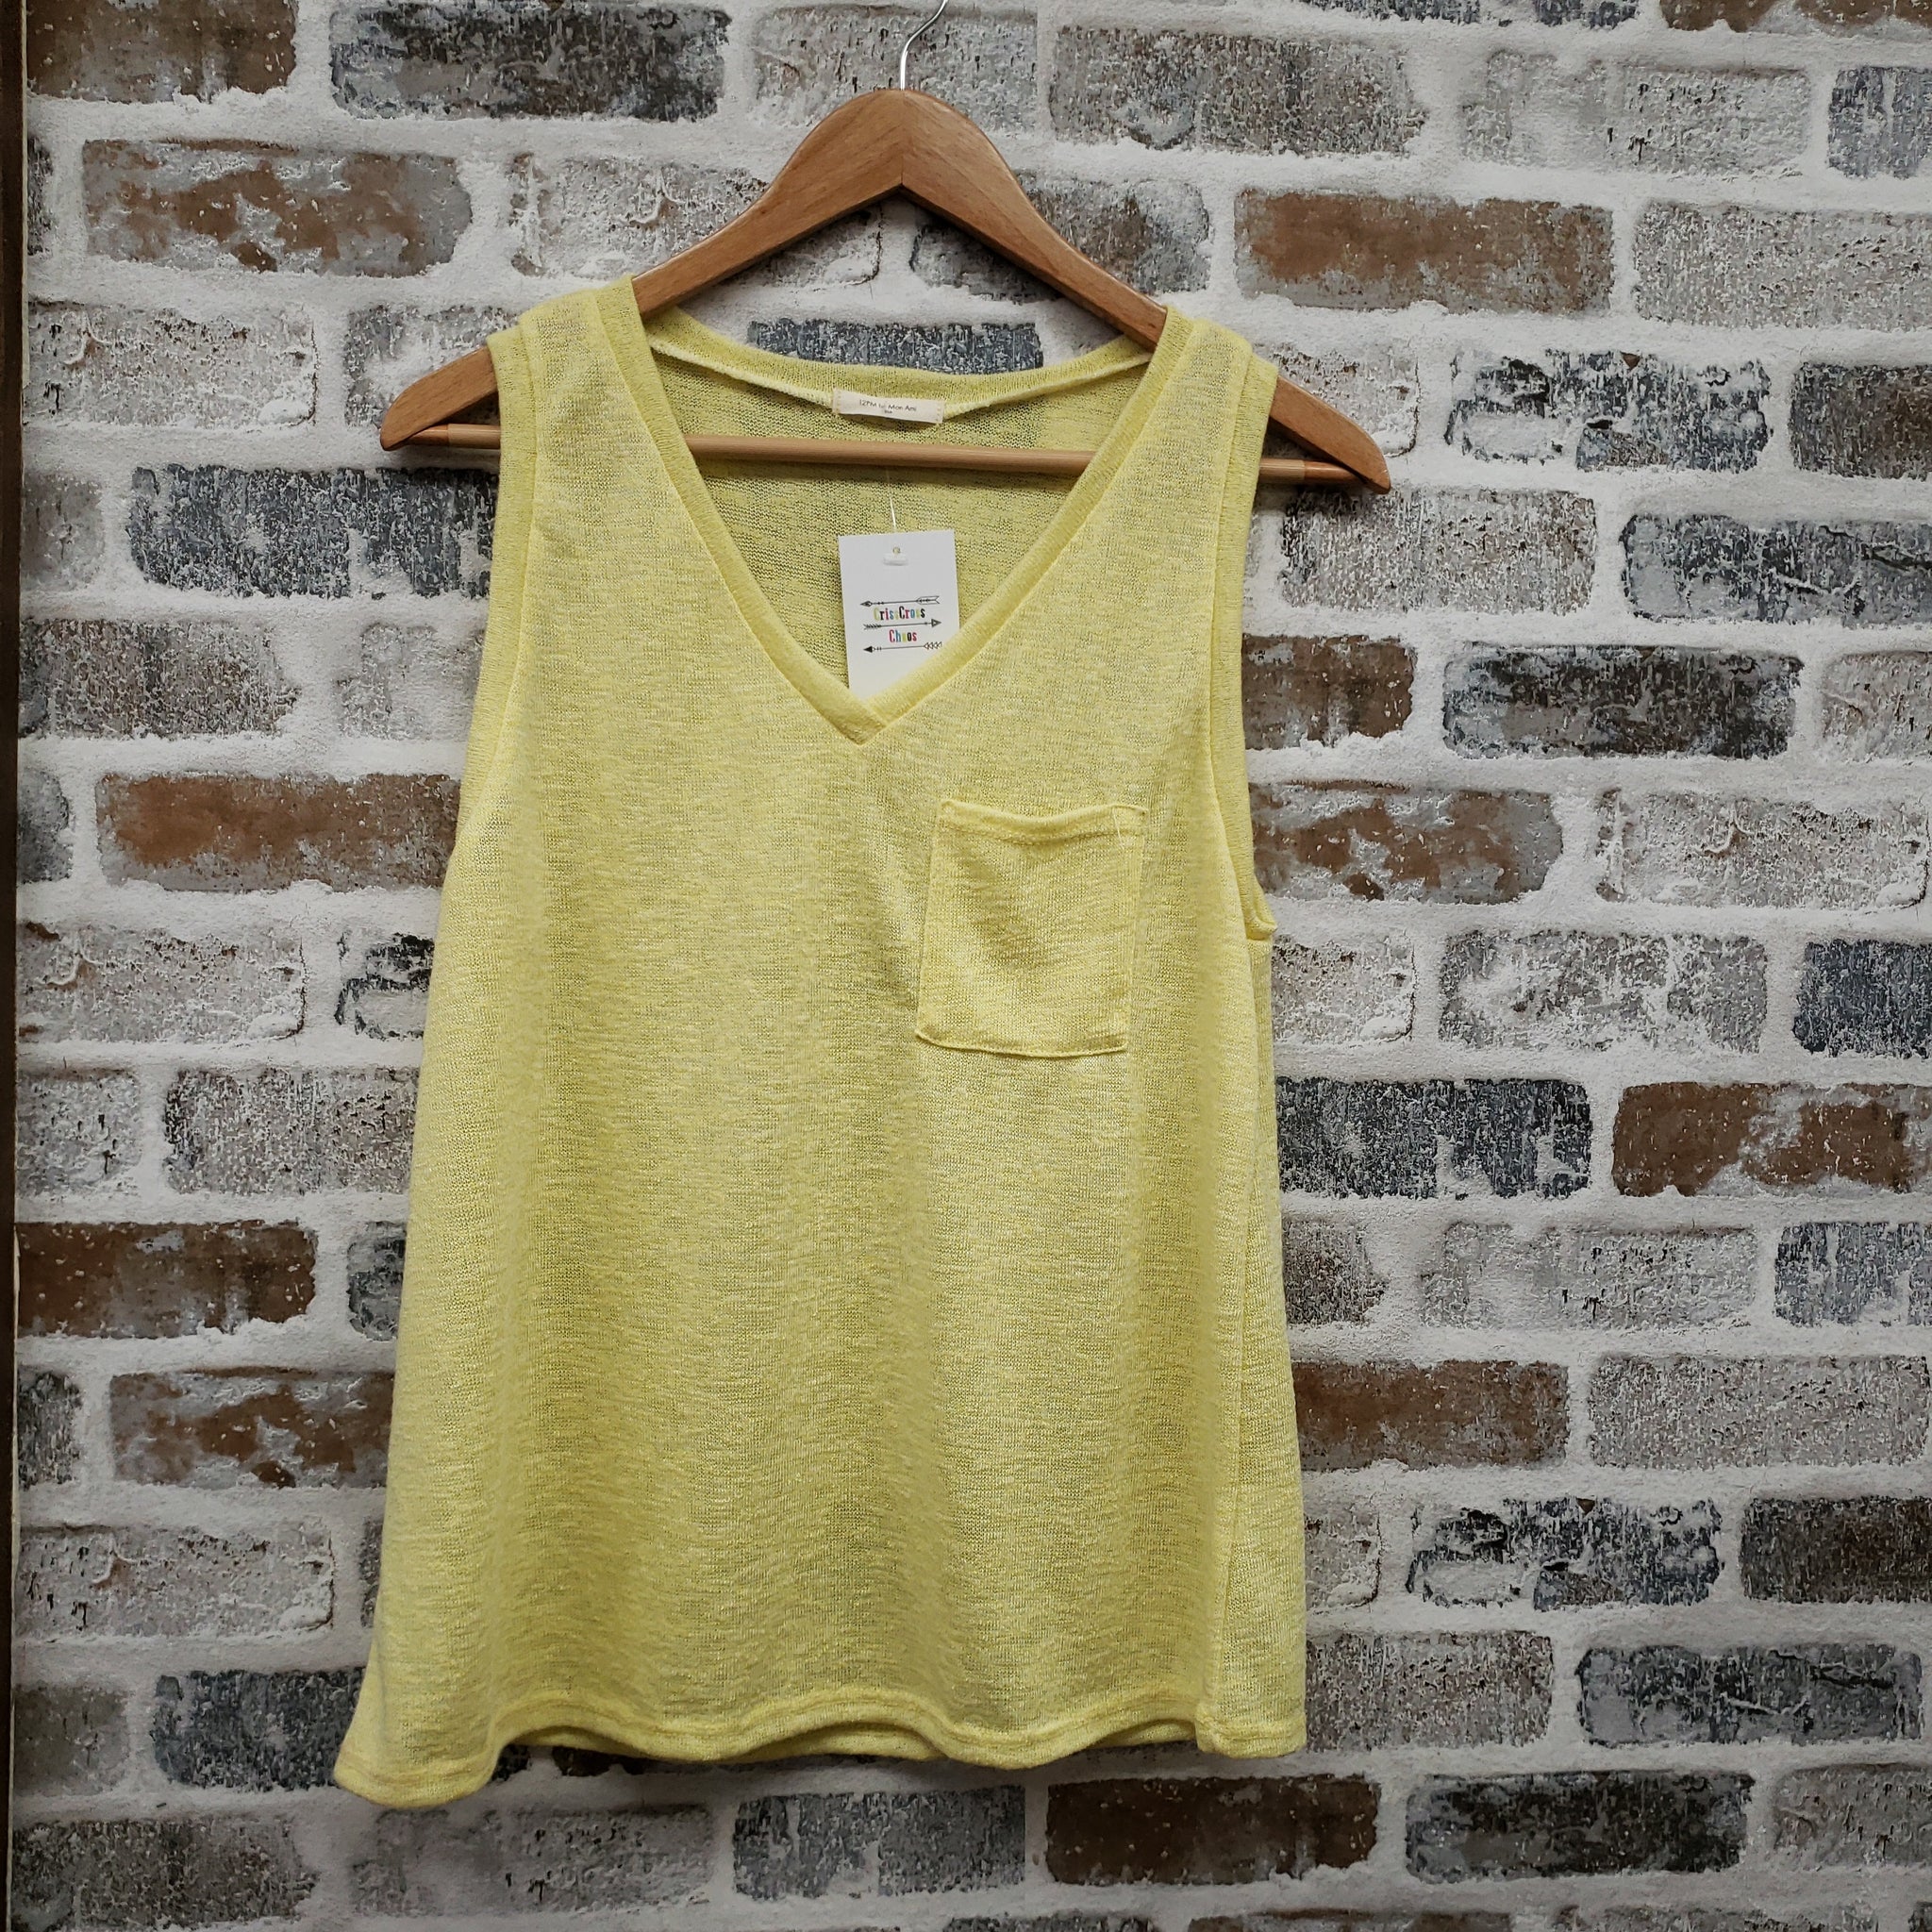 The Day is Long Banana Tank Top